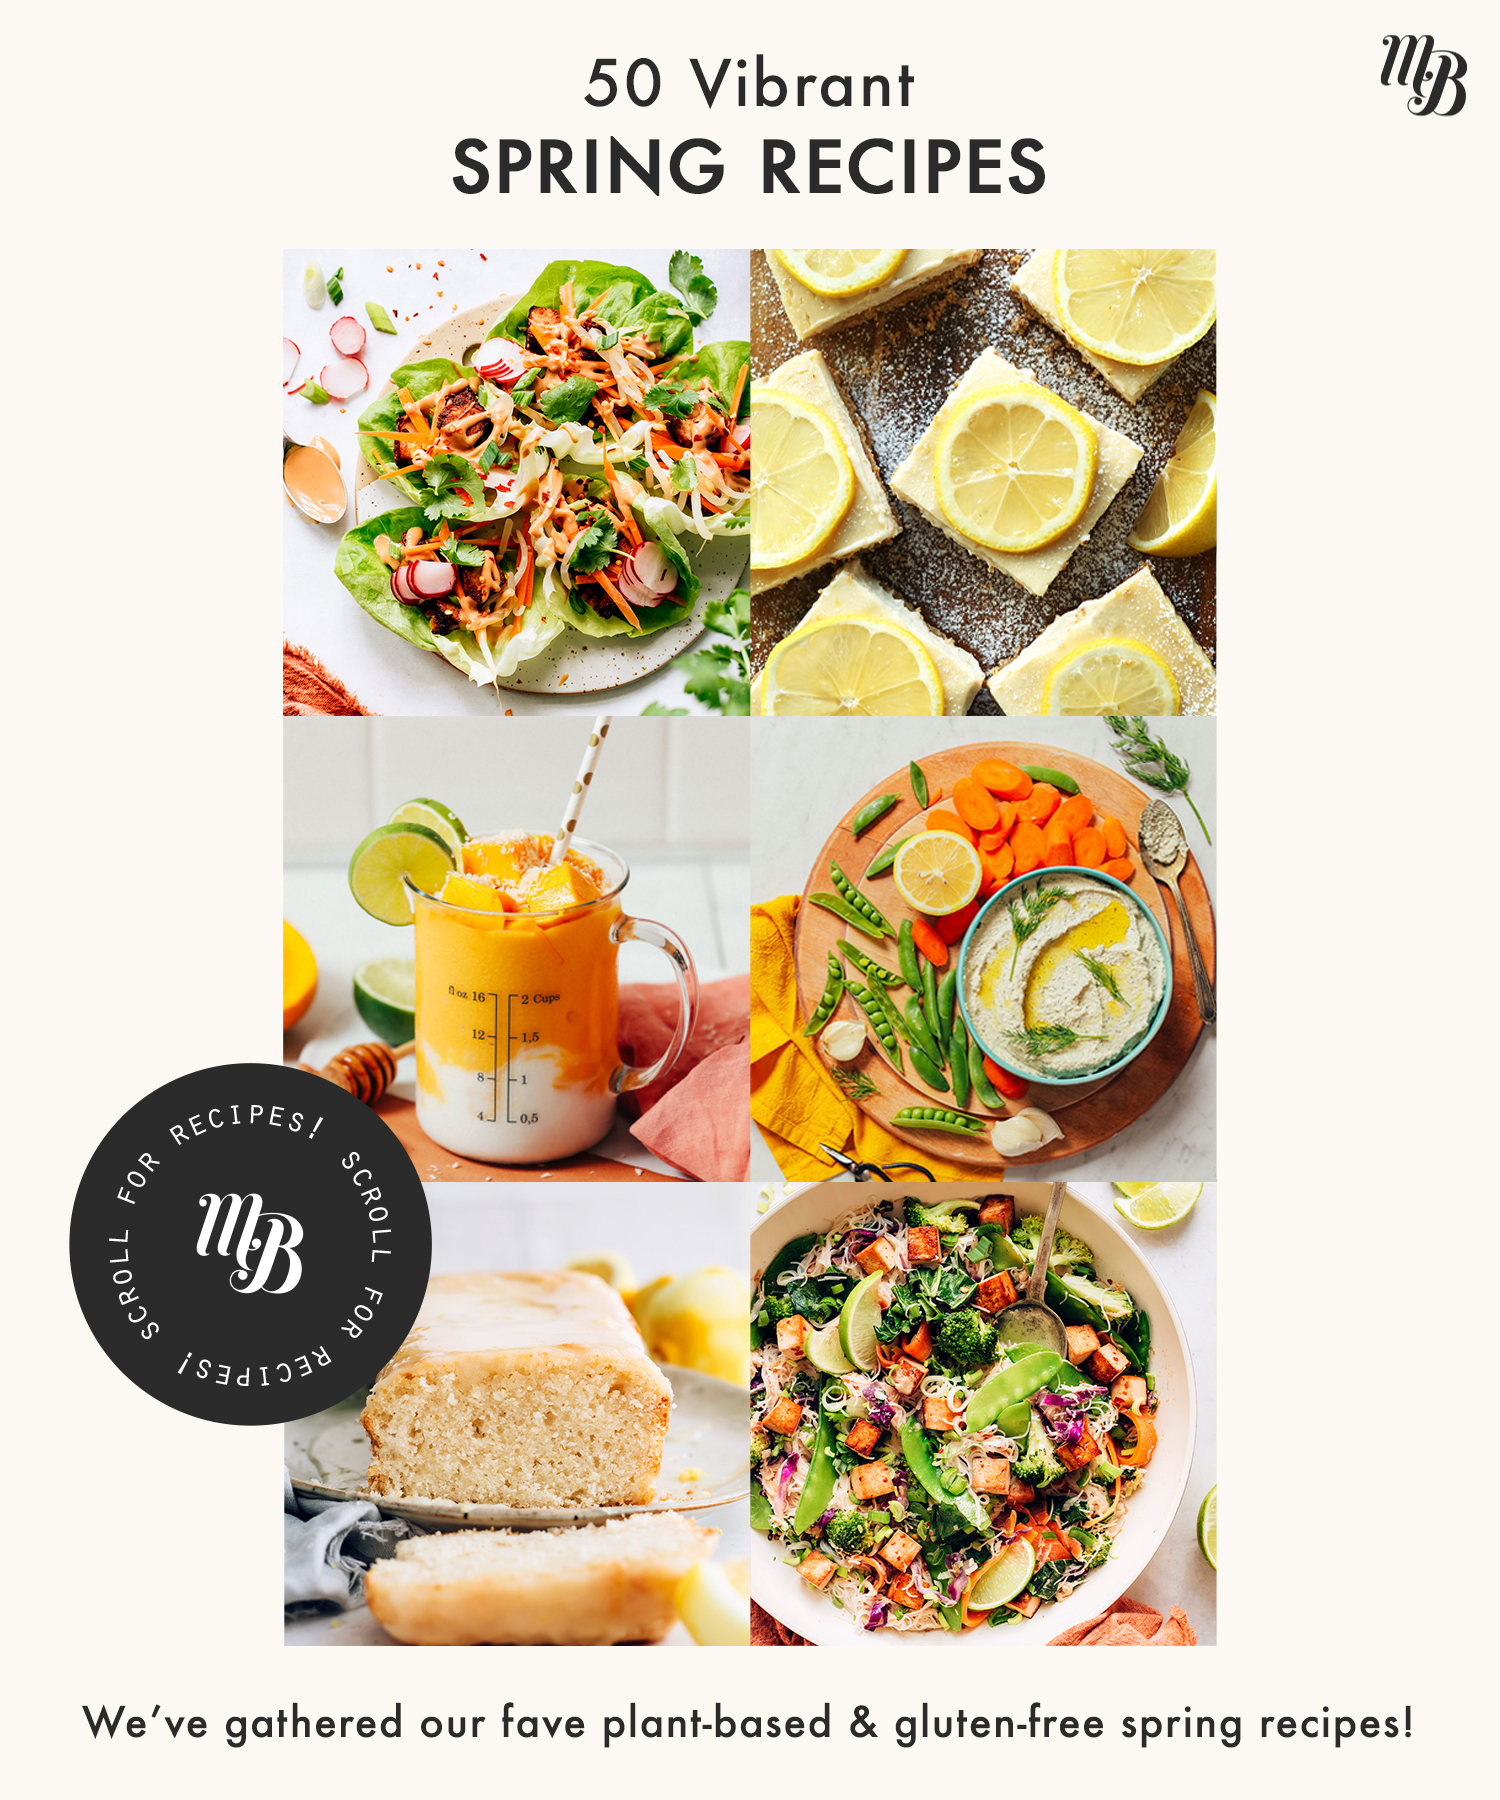 Assortment of plant-based and gluten-free recipes for spring